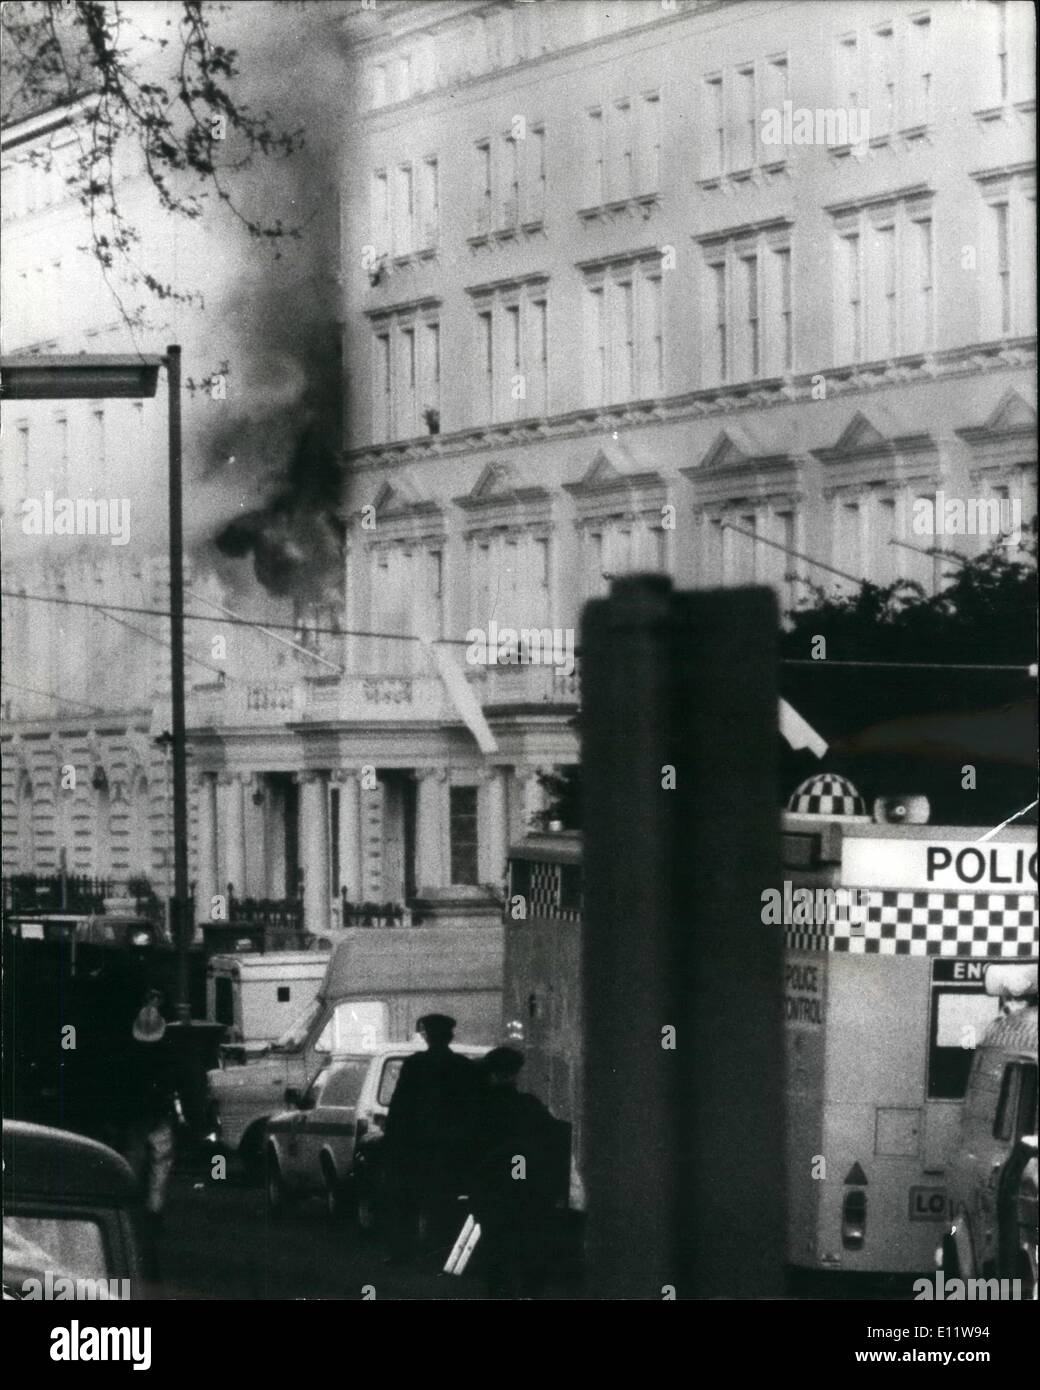 Aug. 08, 1980 - SAS Squad Storm Iranian Embassy And Free All The Hostages: The s-x-day siege of the Iranian Embassy in London;'s Knightsbridge, ended last night in a point police - special Air Service Regt operation in which the remaining 19 hostages were brought out alive from the bombed blasted and burning building. Three of the five terrorist were shot dead, one was wounded and the other one was taken by the SAS. Photo Shows The burning Iranian Embassy Building after the Special Air Services Regt had stormed inside and freed the hostages. Stock Photo